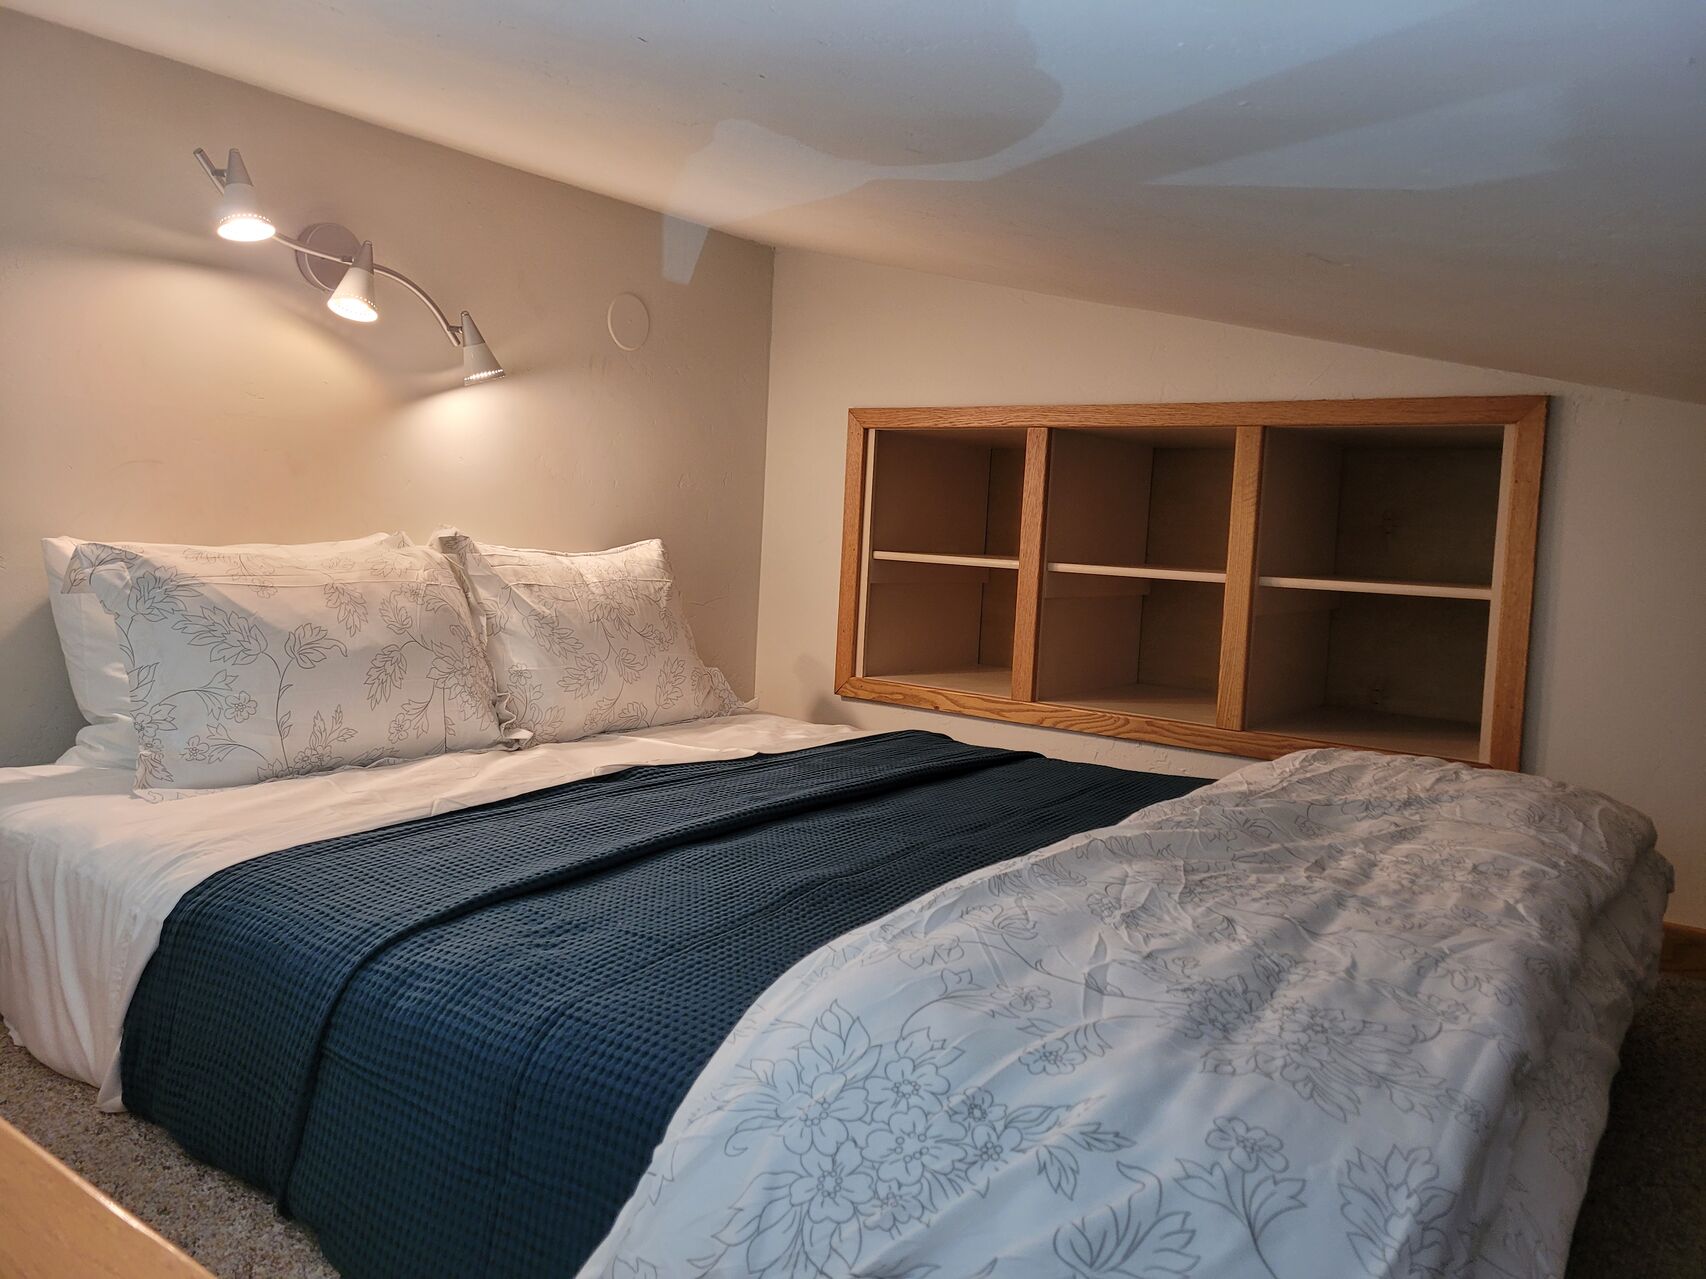 Large bed with blue and white covers and built-in shelves